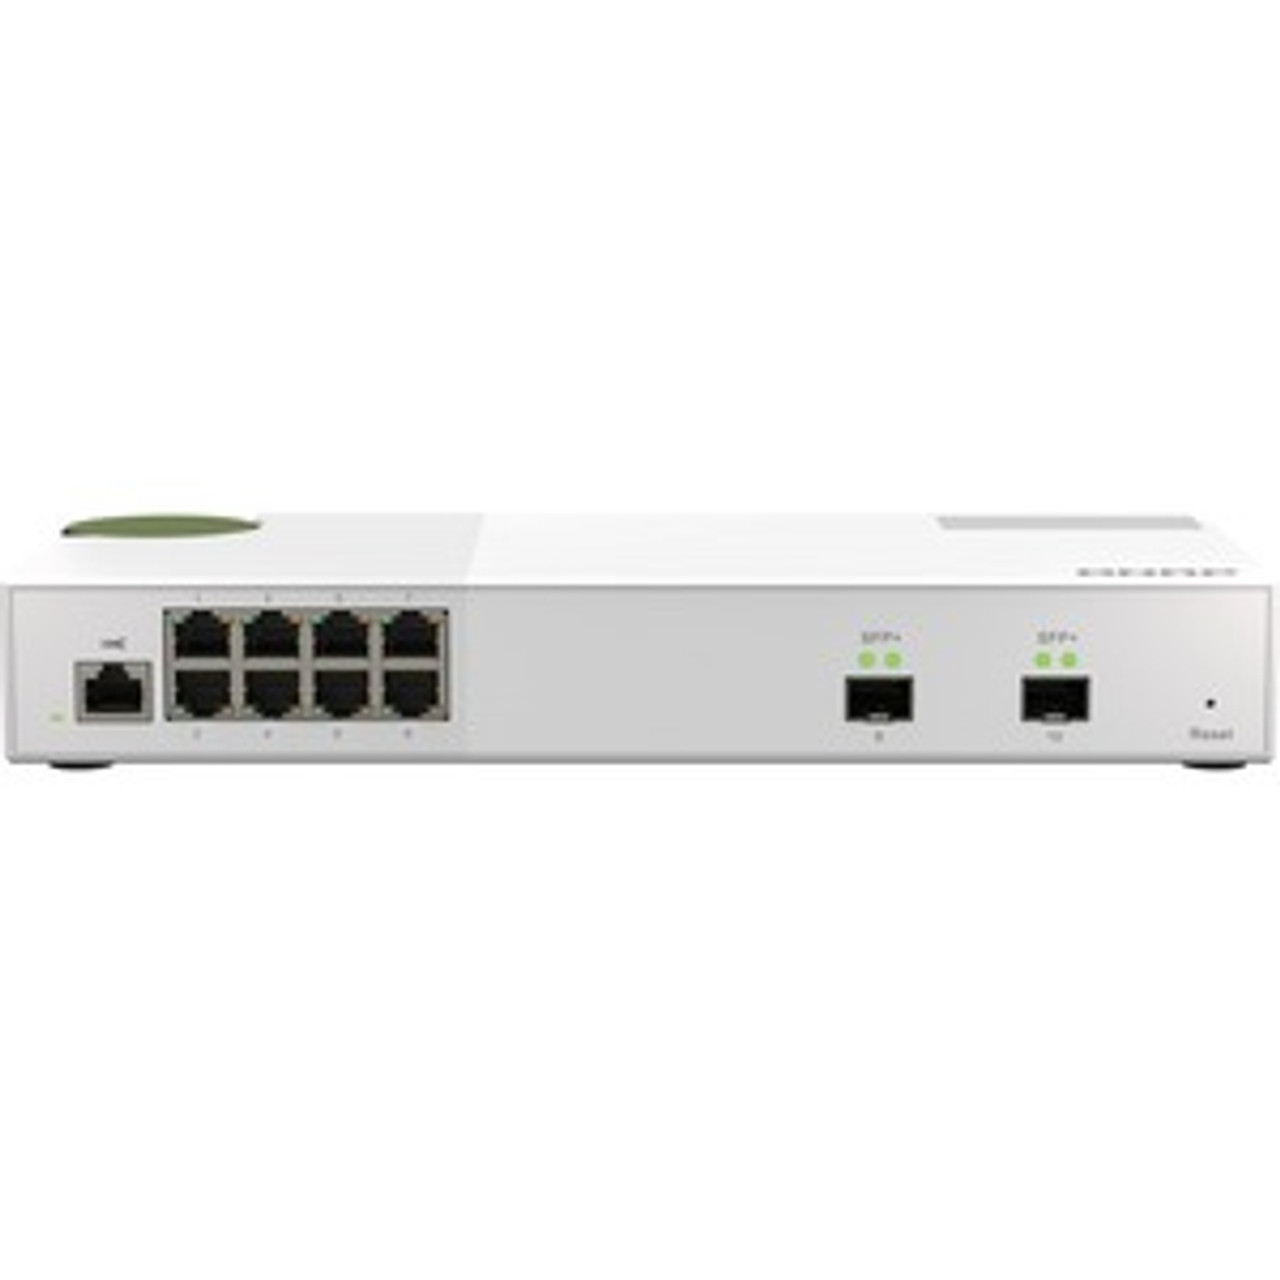 QSW-M2108-2S QNAP QSW-M2108-2S Ethernet Switch - 8 Ports - Manageable - 2 Layer Supported - Modular - 12.17 W Power Consumption - Twisted Pair, Optical Fiber - 